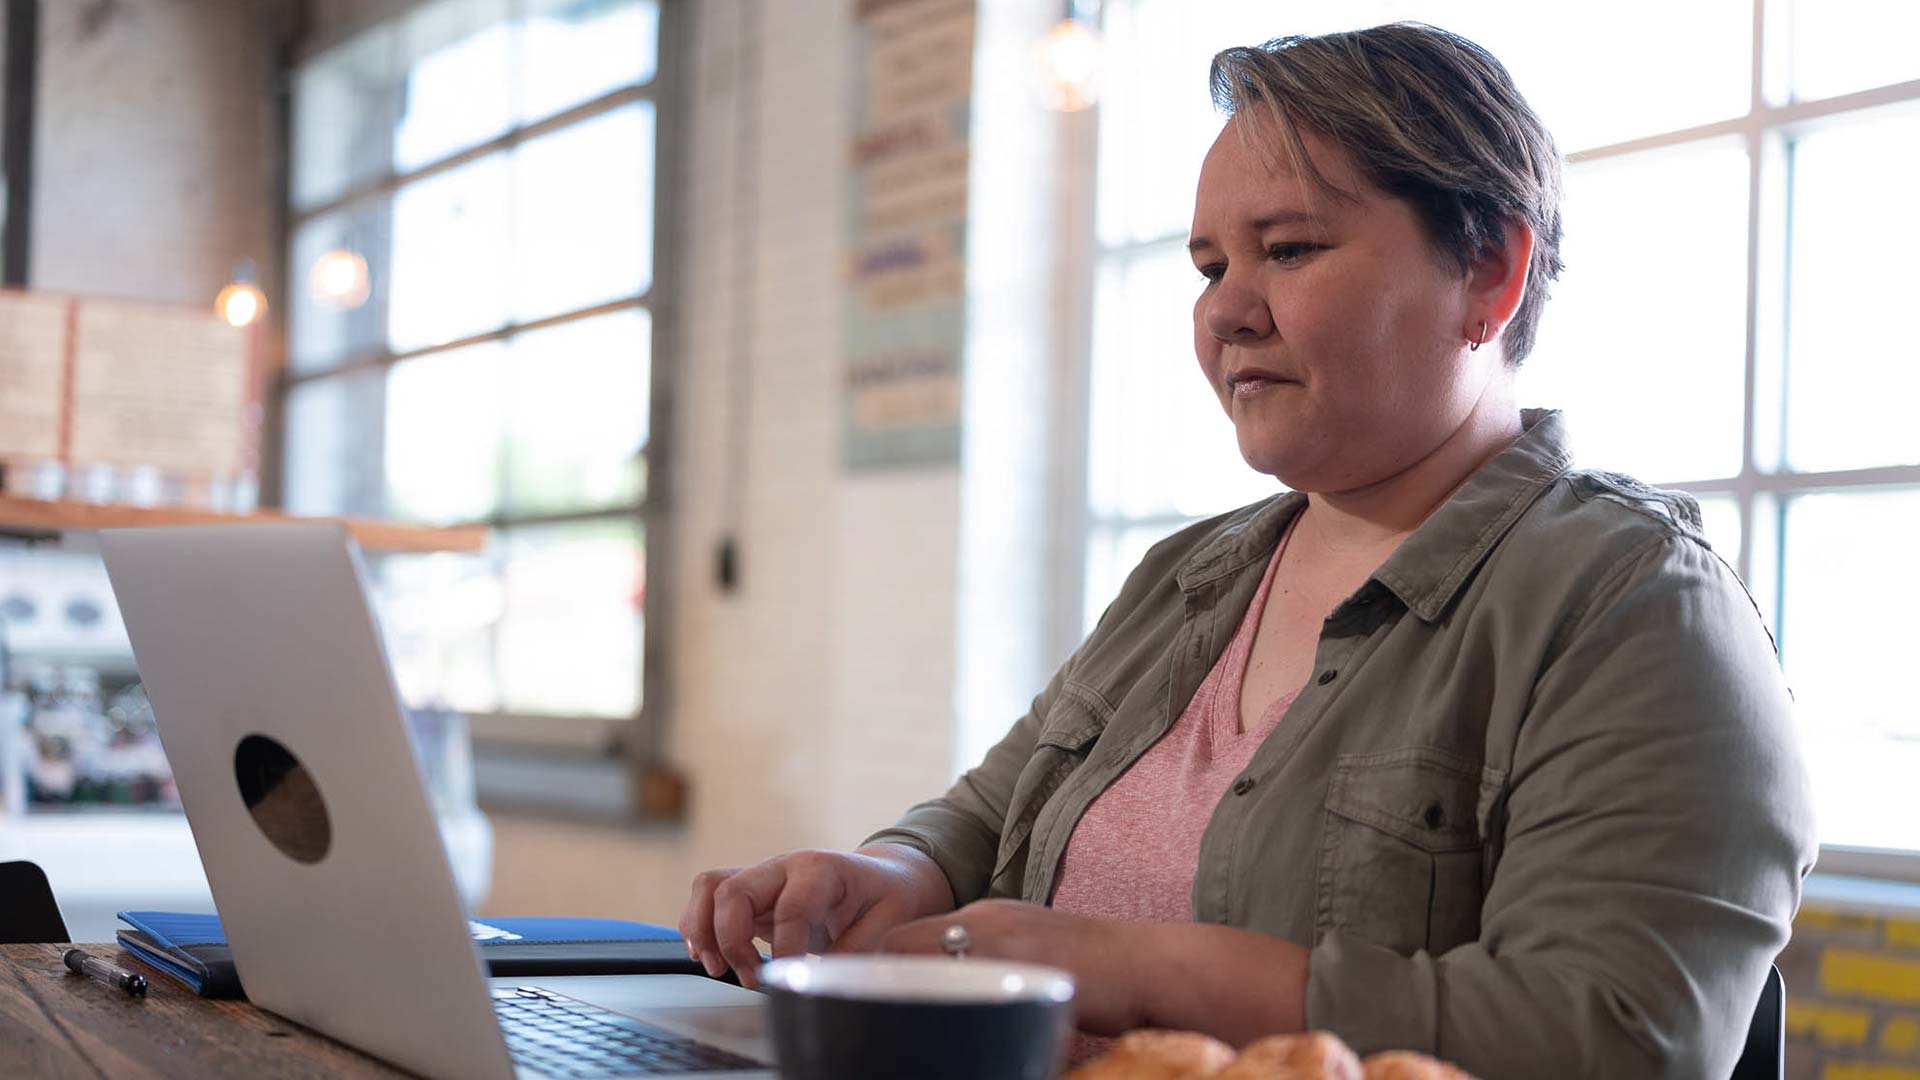 Alaine Garcia, who earned her degree from SNHU in 2019, typing on her laptop computer.